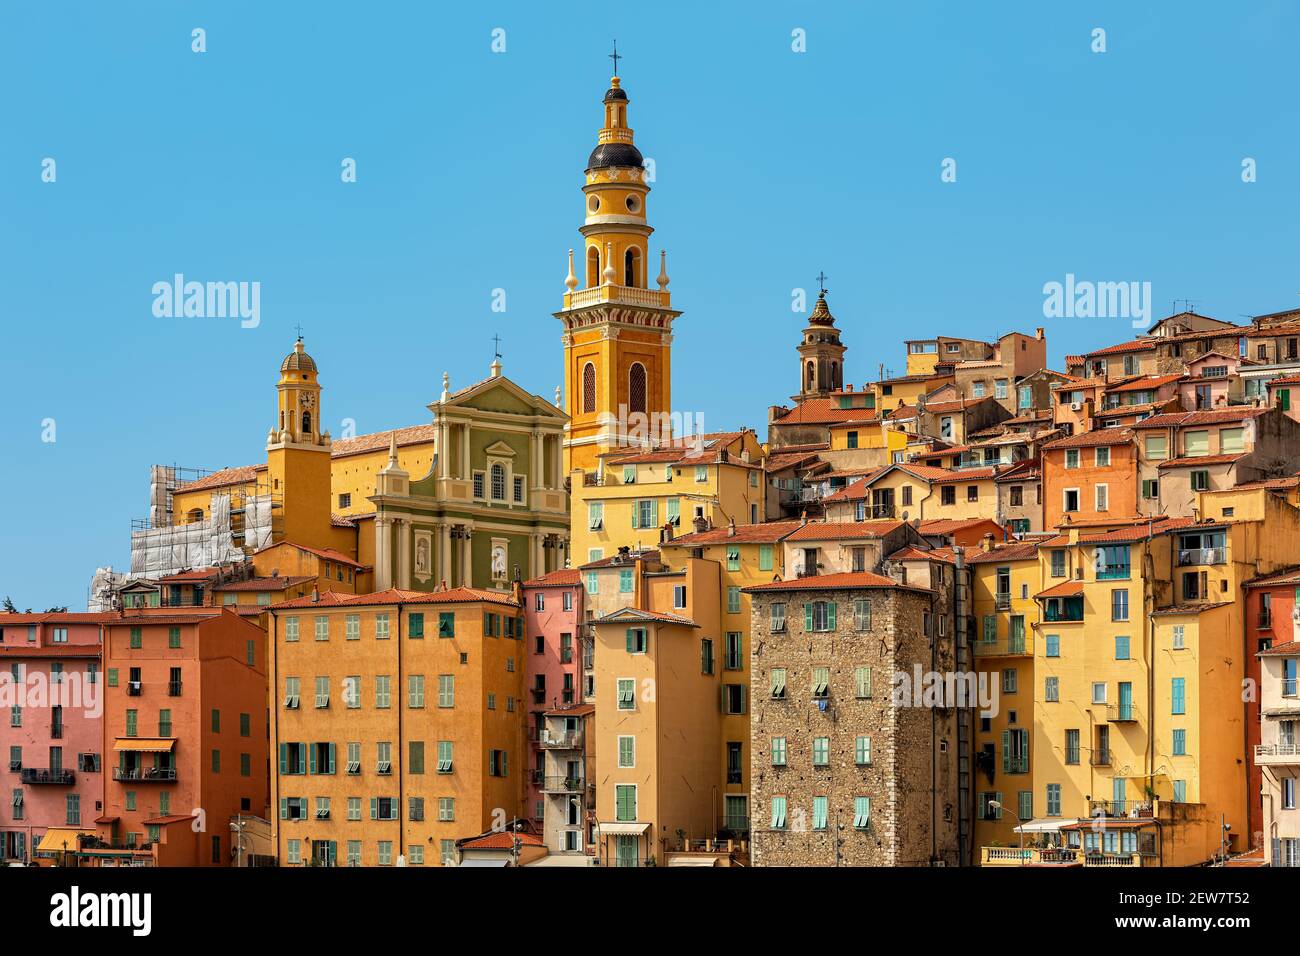 View of colorful houses and belfry of the Saint Michel Archange basilica under blue sky in Menton - small town on French Riviera. Stock Photo